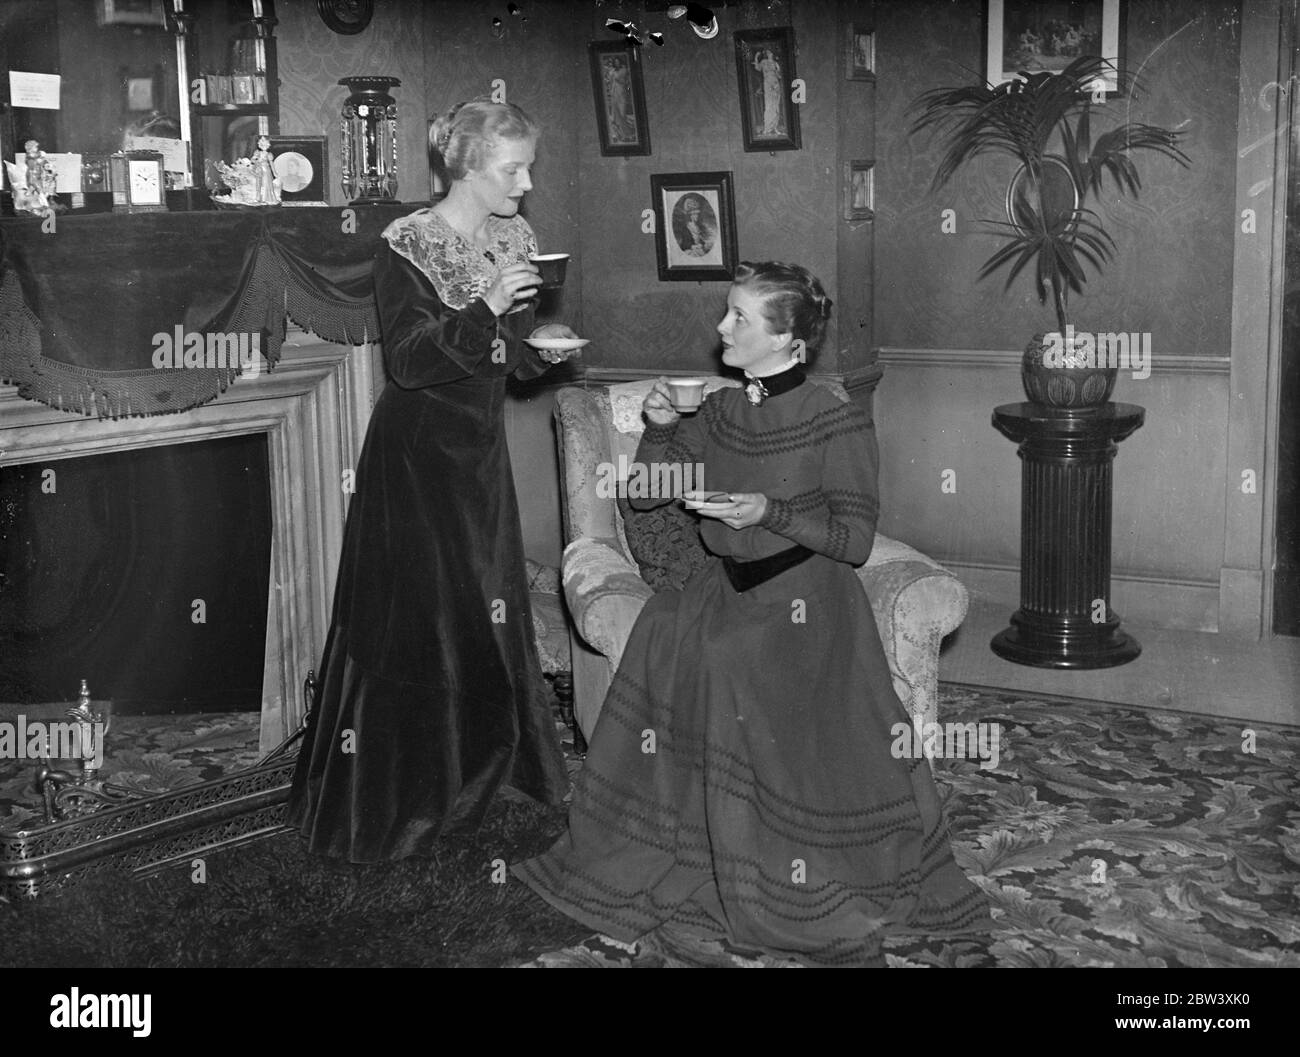 The two candidas Ann Harding whishes successor good luck in Shaw Play. In the costume she wore for the part, Miss Ann Harding whishes good luck to hear successor, Miss Diana Wynyard, who is taking over the role of Candida in Bernard Shaw's play of that name at the Globe Theatre, Shaftesbury Avenue, London. Photo shows: Miss Ann Harding whishes her successor, Miss Diana Wynyard, good luck at the Globe Theatre. Both are wearing Candida's costume. 30 March 1937 Stock Photo